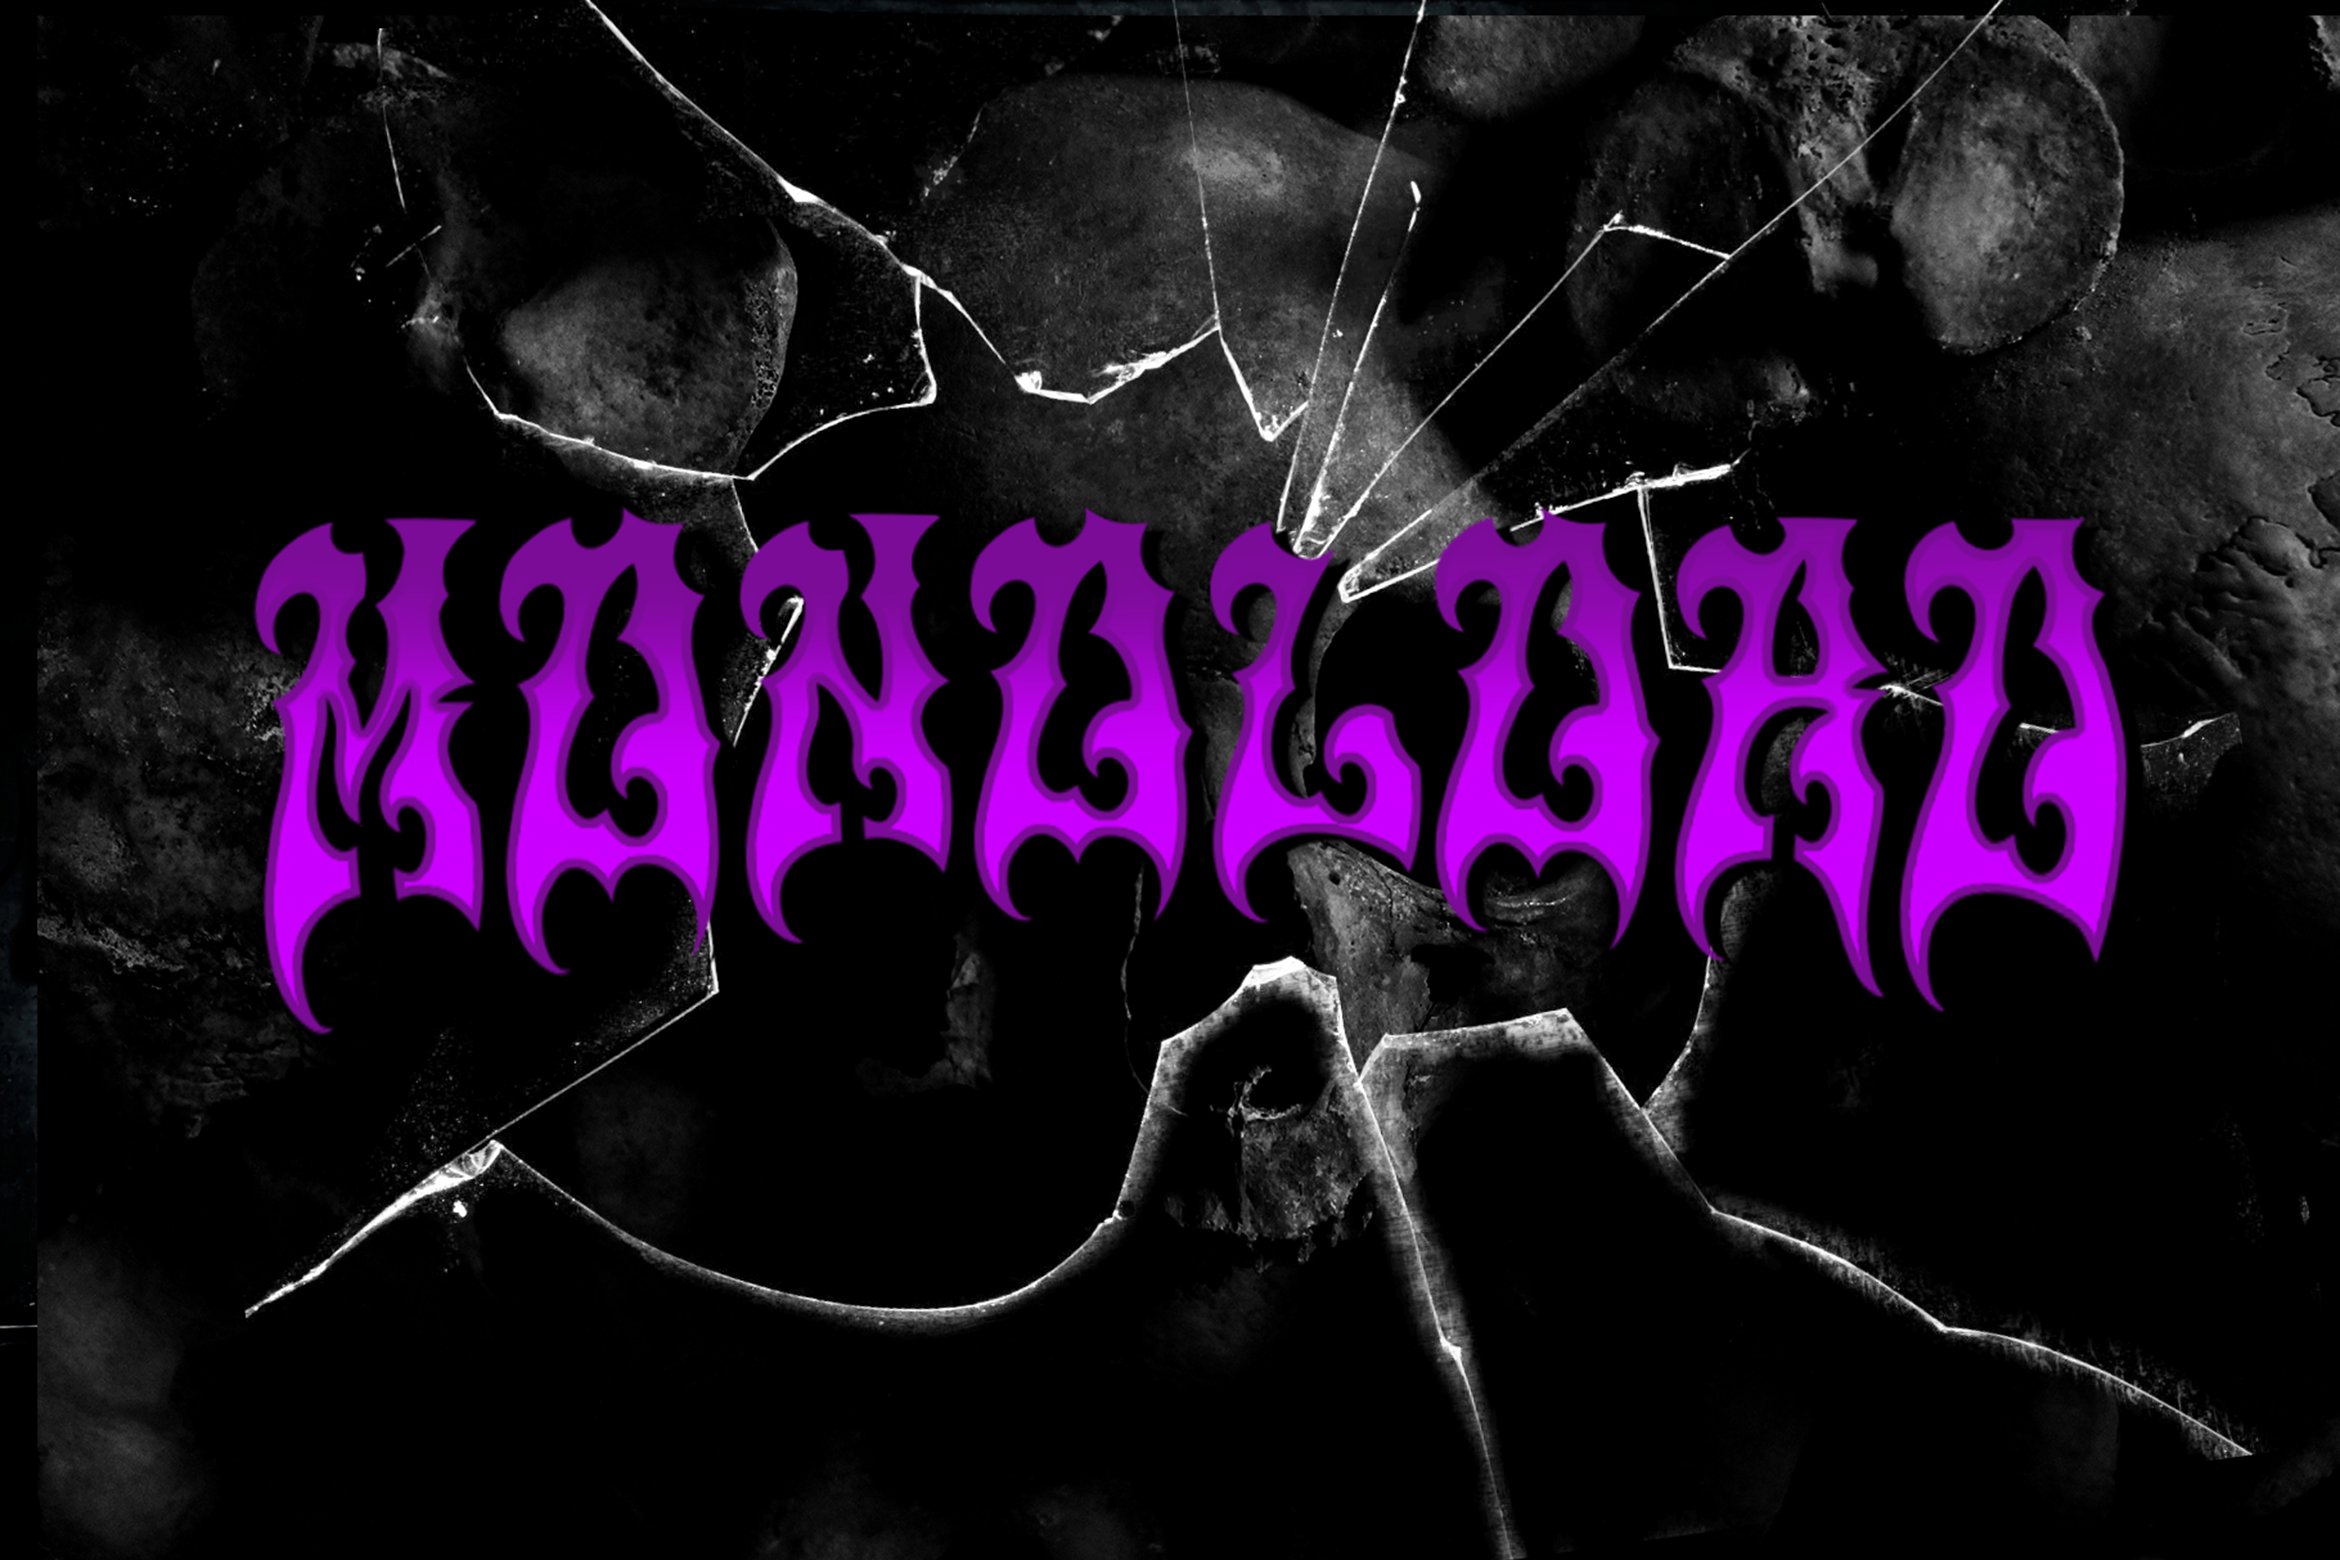 Monoload Doom Gothic Metal Font cover image.